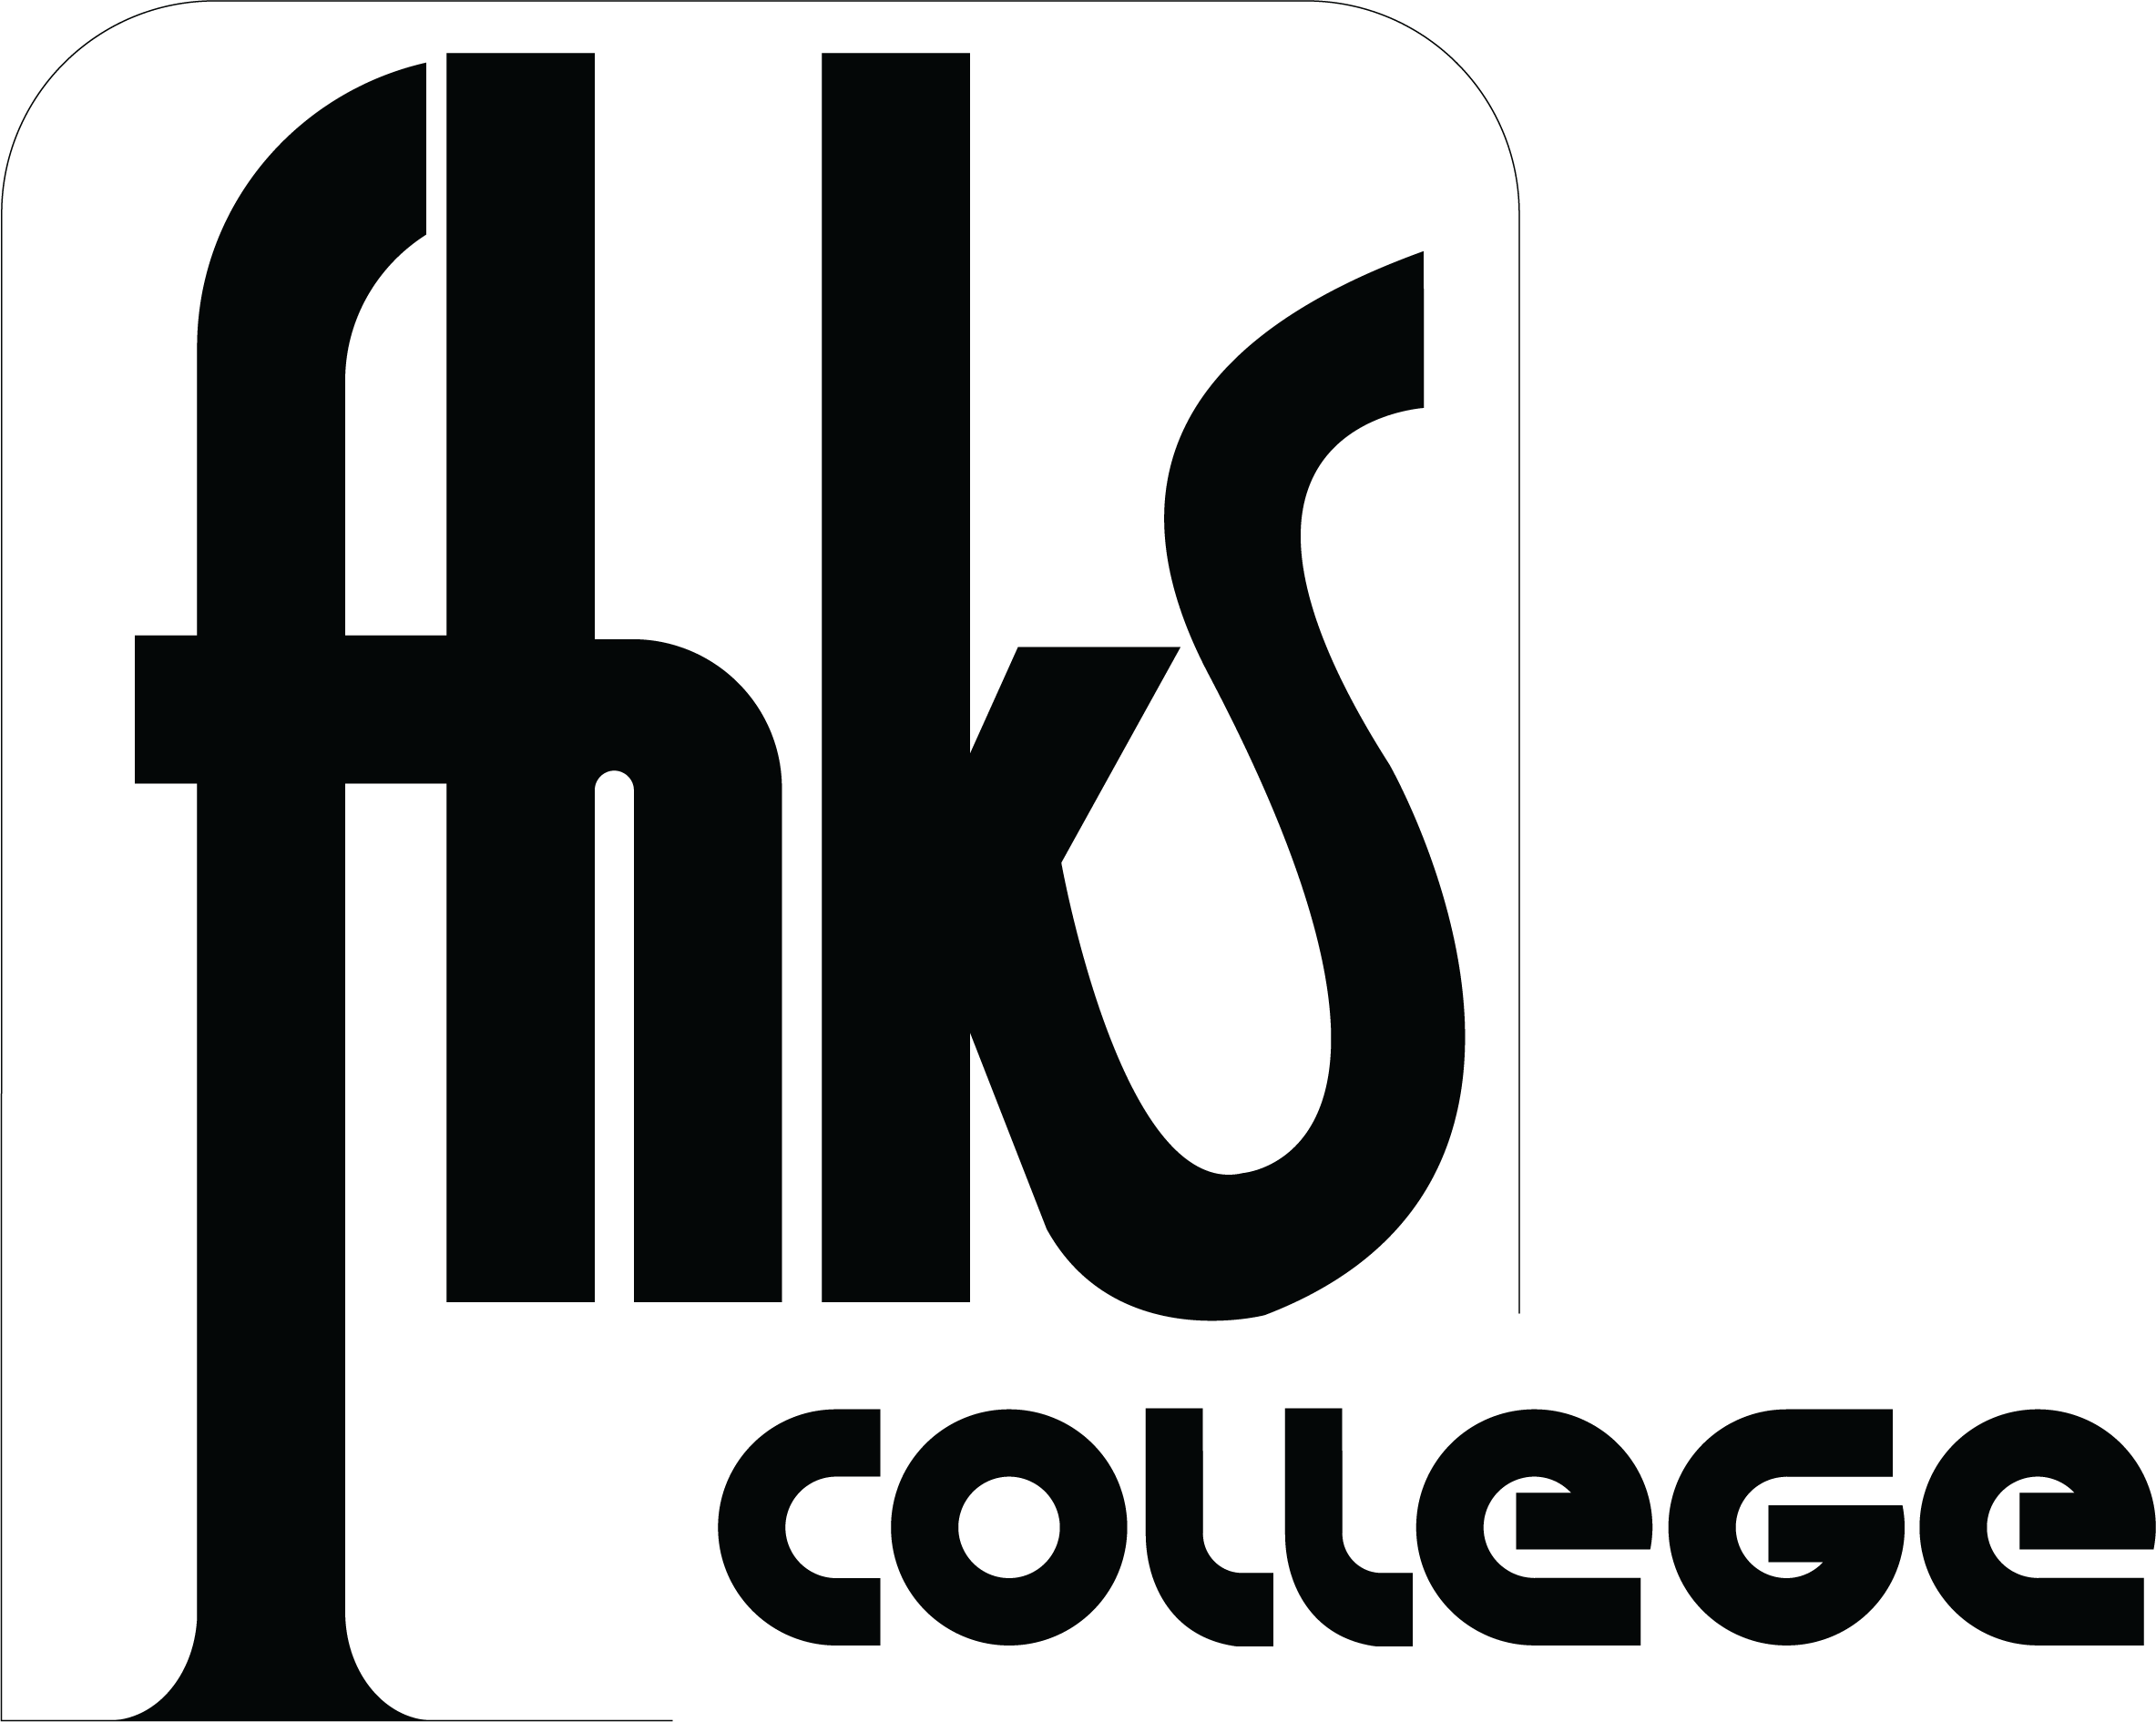 1973---fhks-college-logo.png